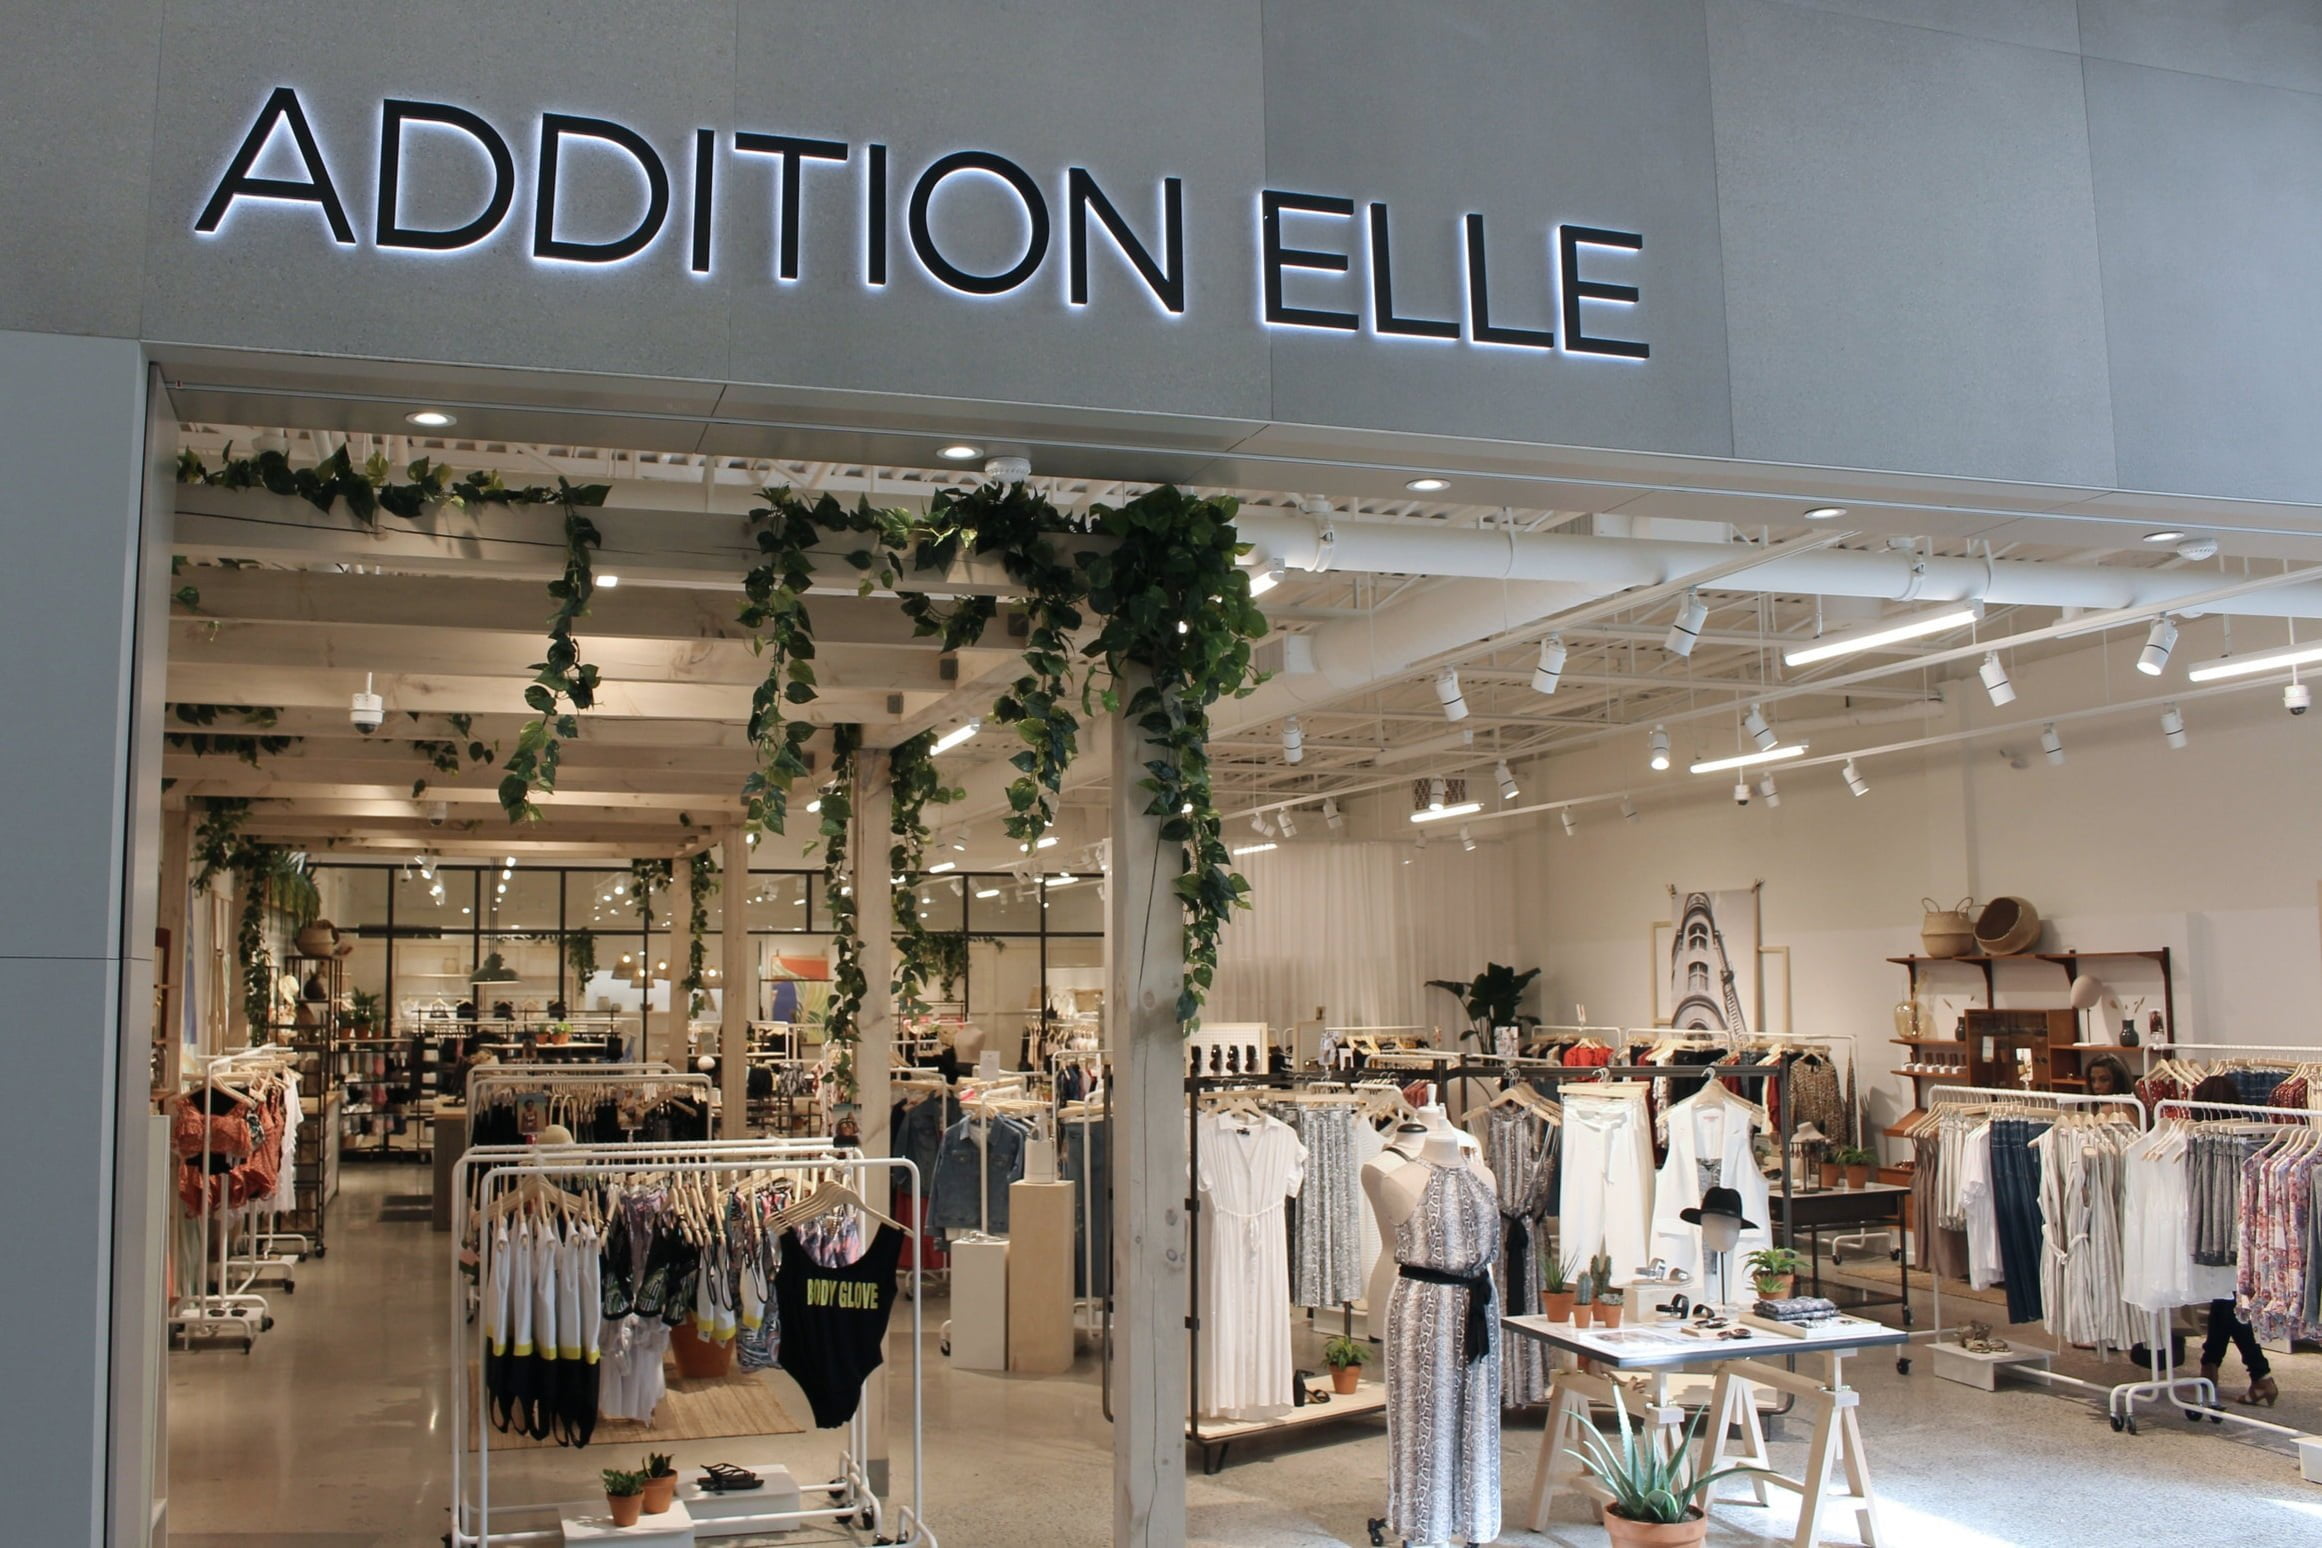 Canadian Fashion Retailer ADDITION ELLE Launches New Store Concept